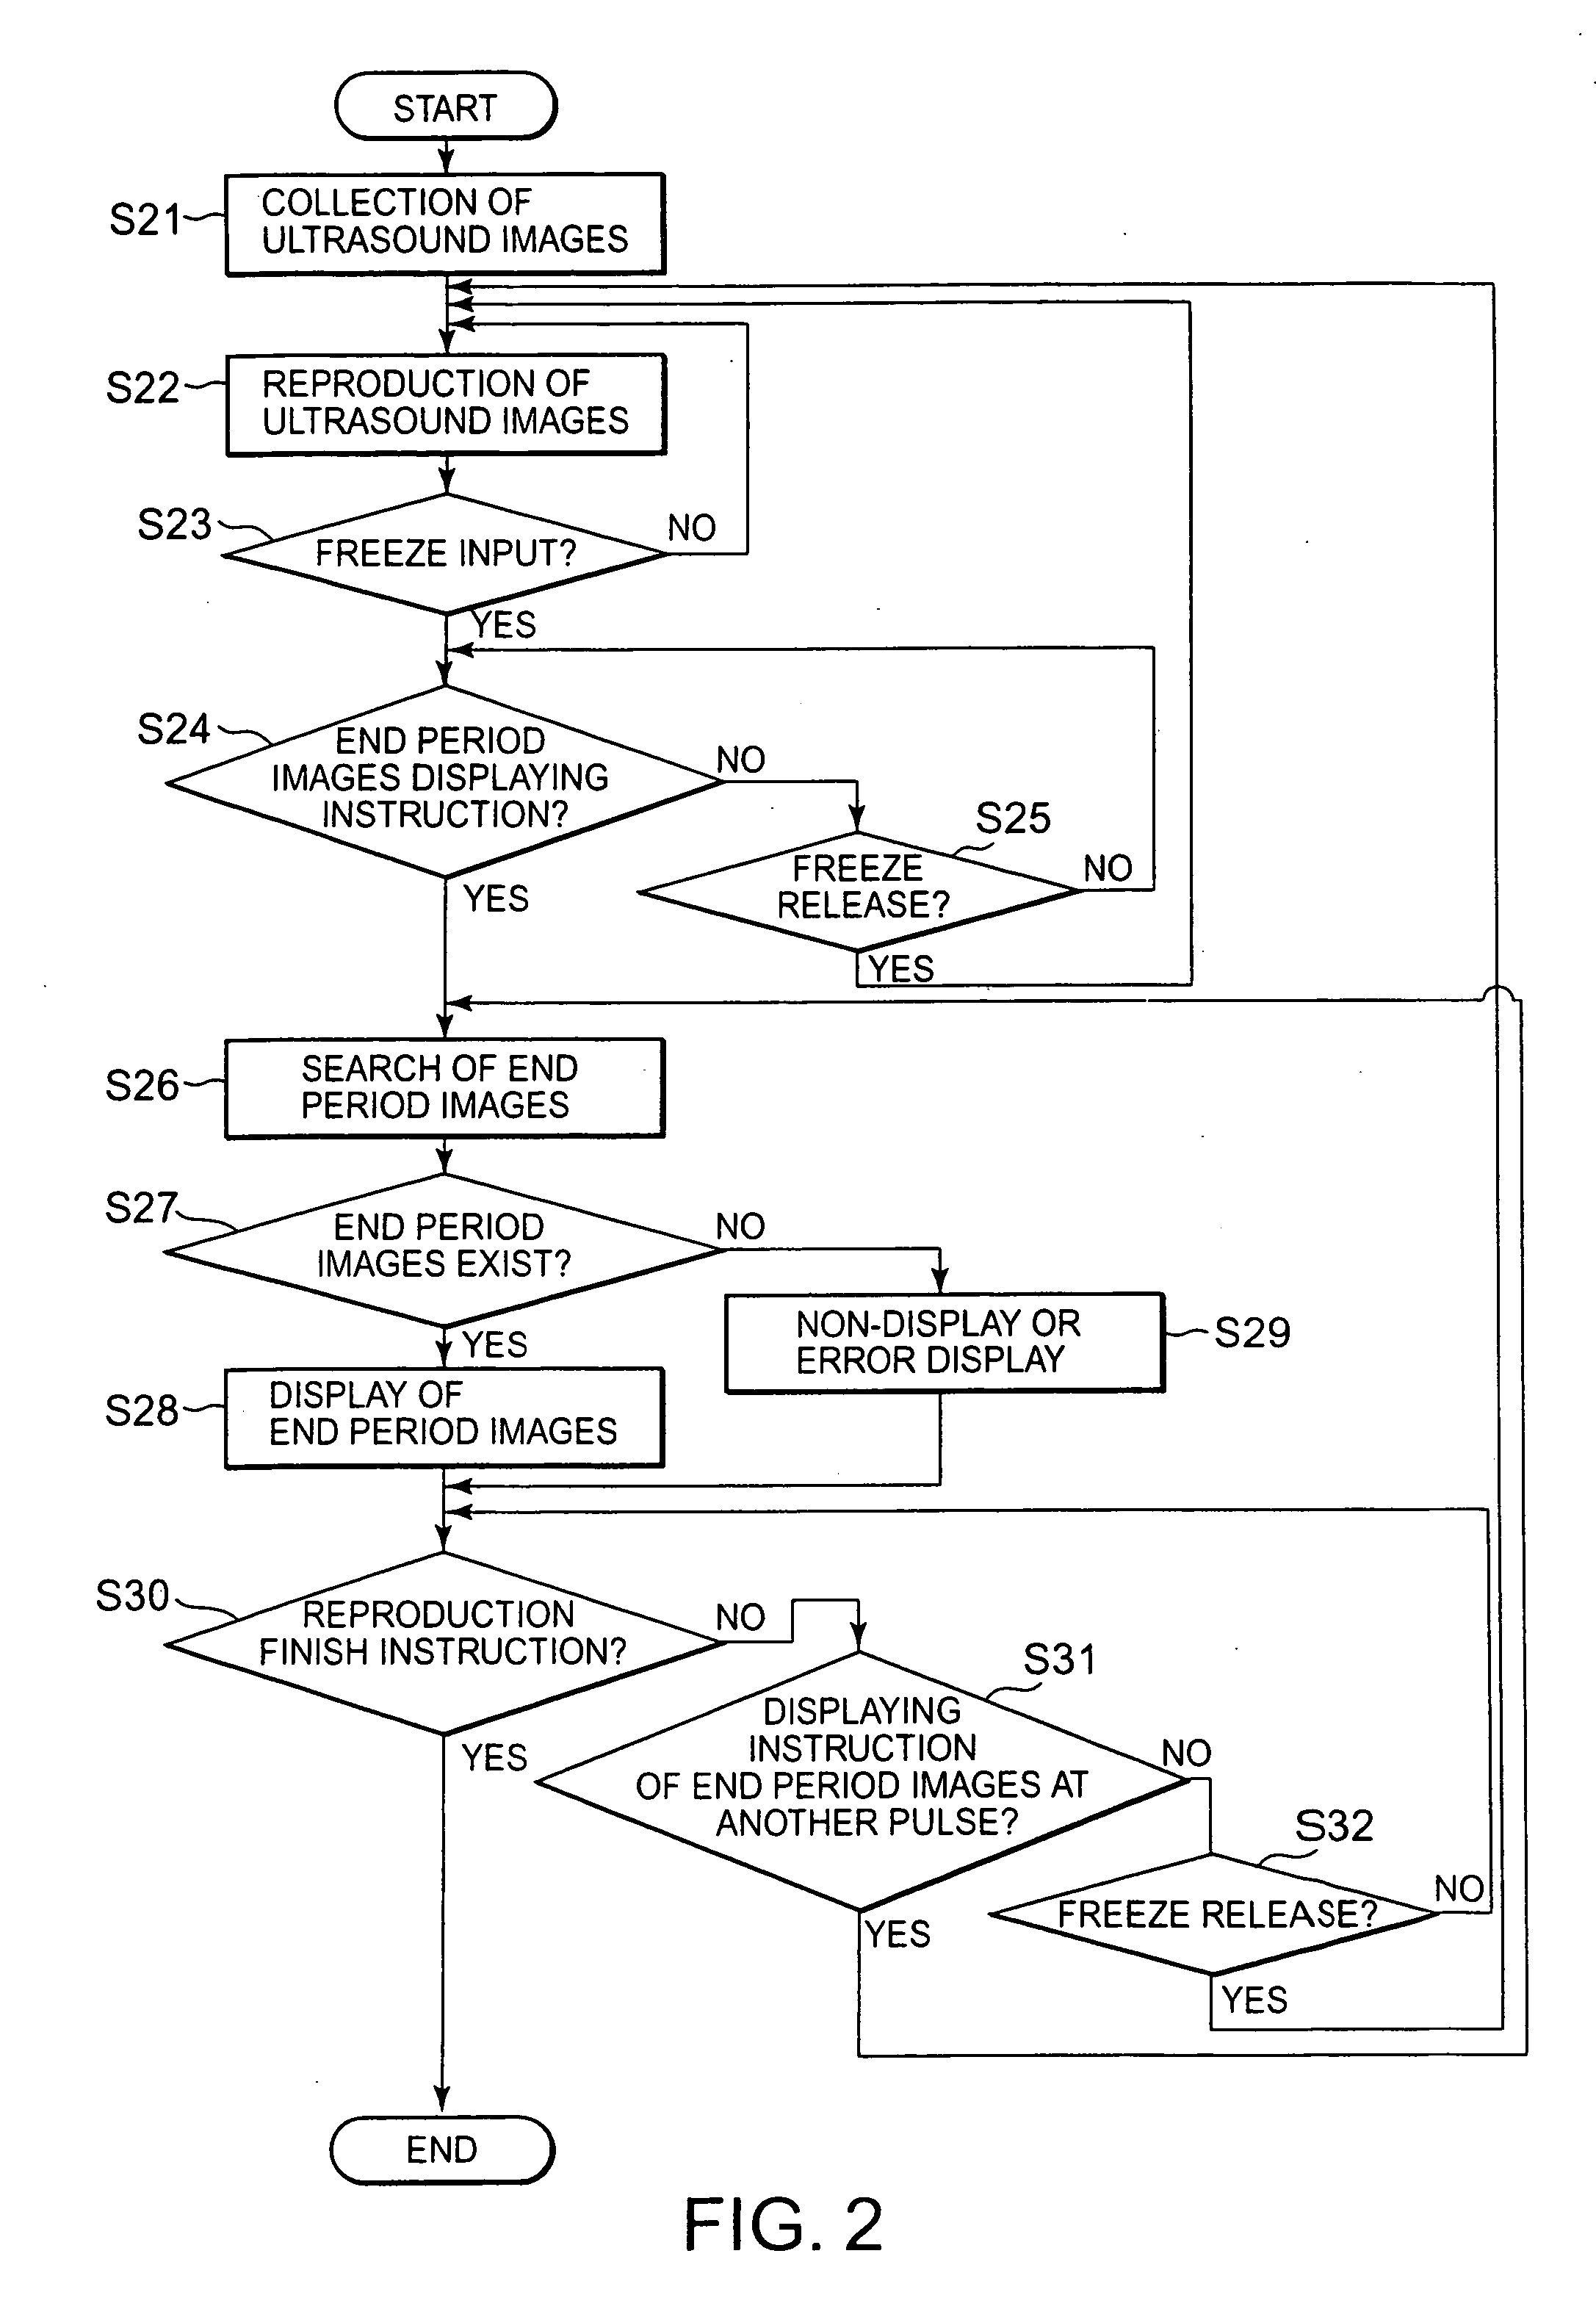 Ultrasound image diagnosis apparatus and an apparatus and method for processing an image display